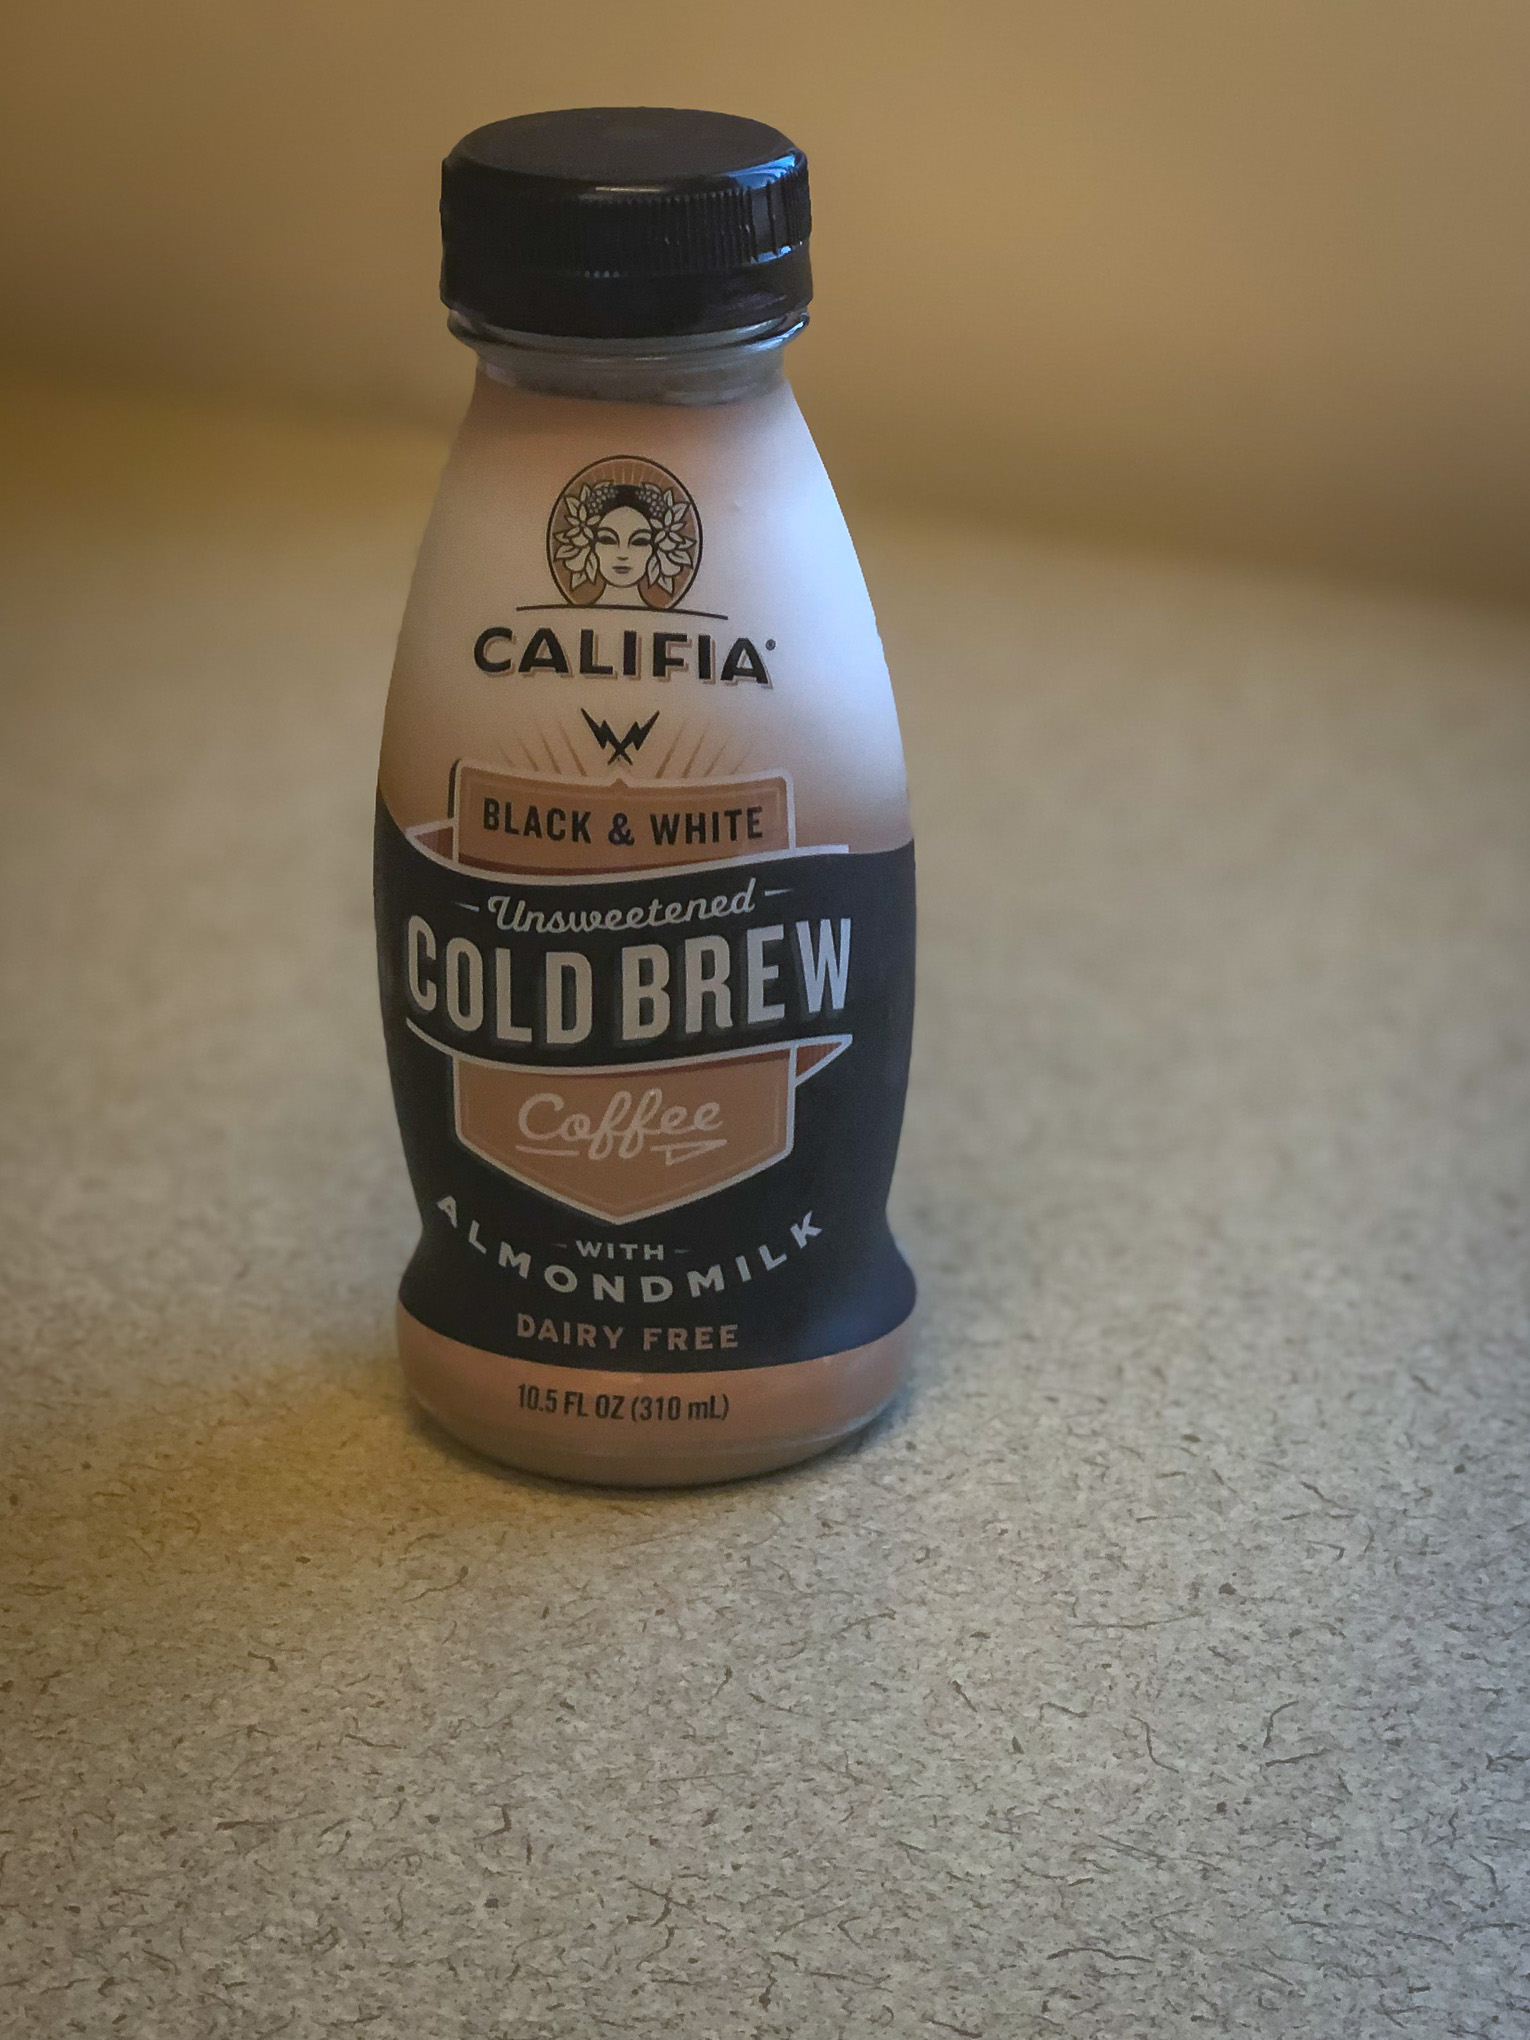 Bottle of iced coffee